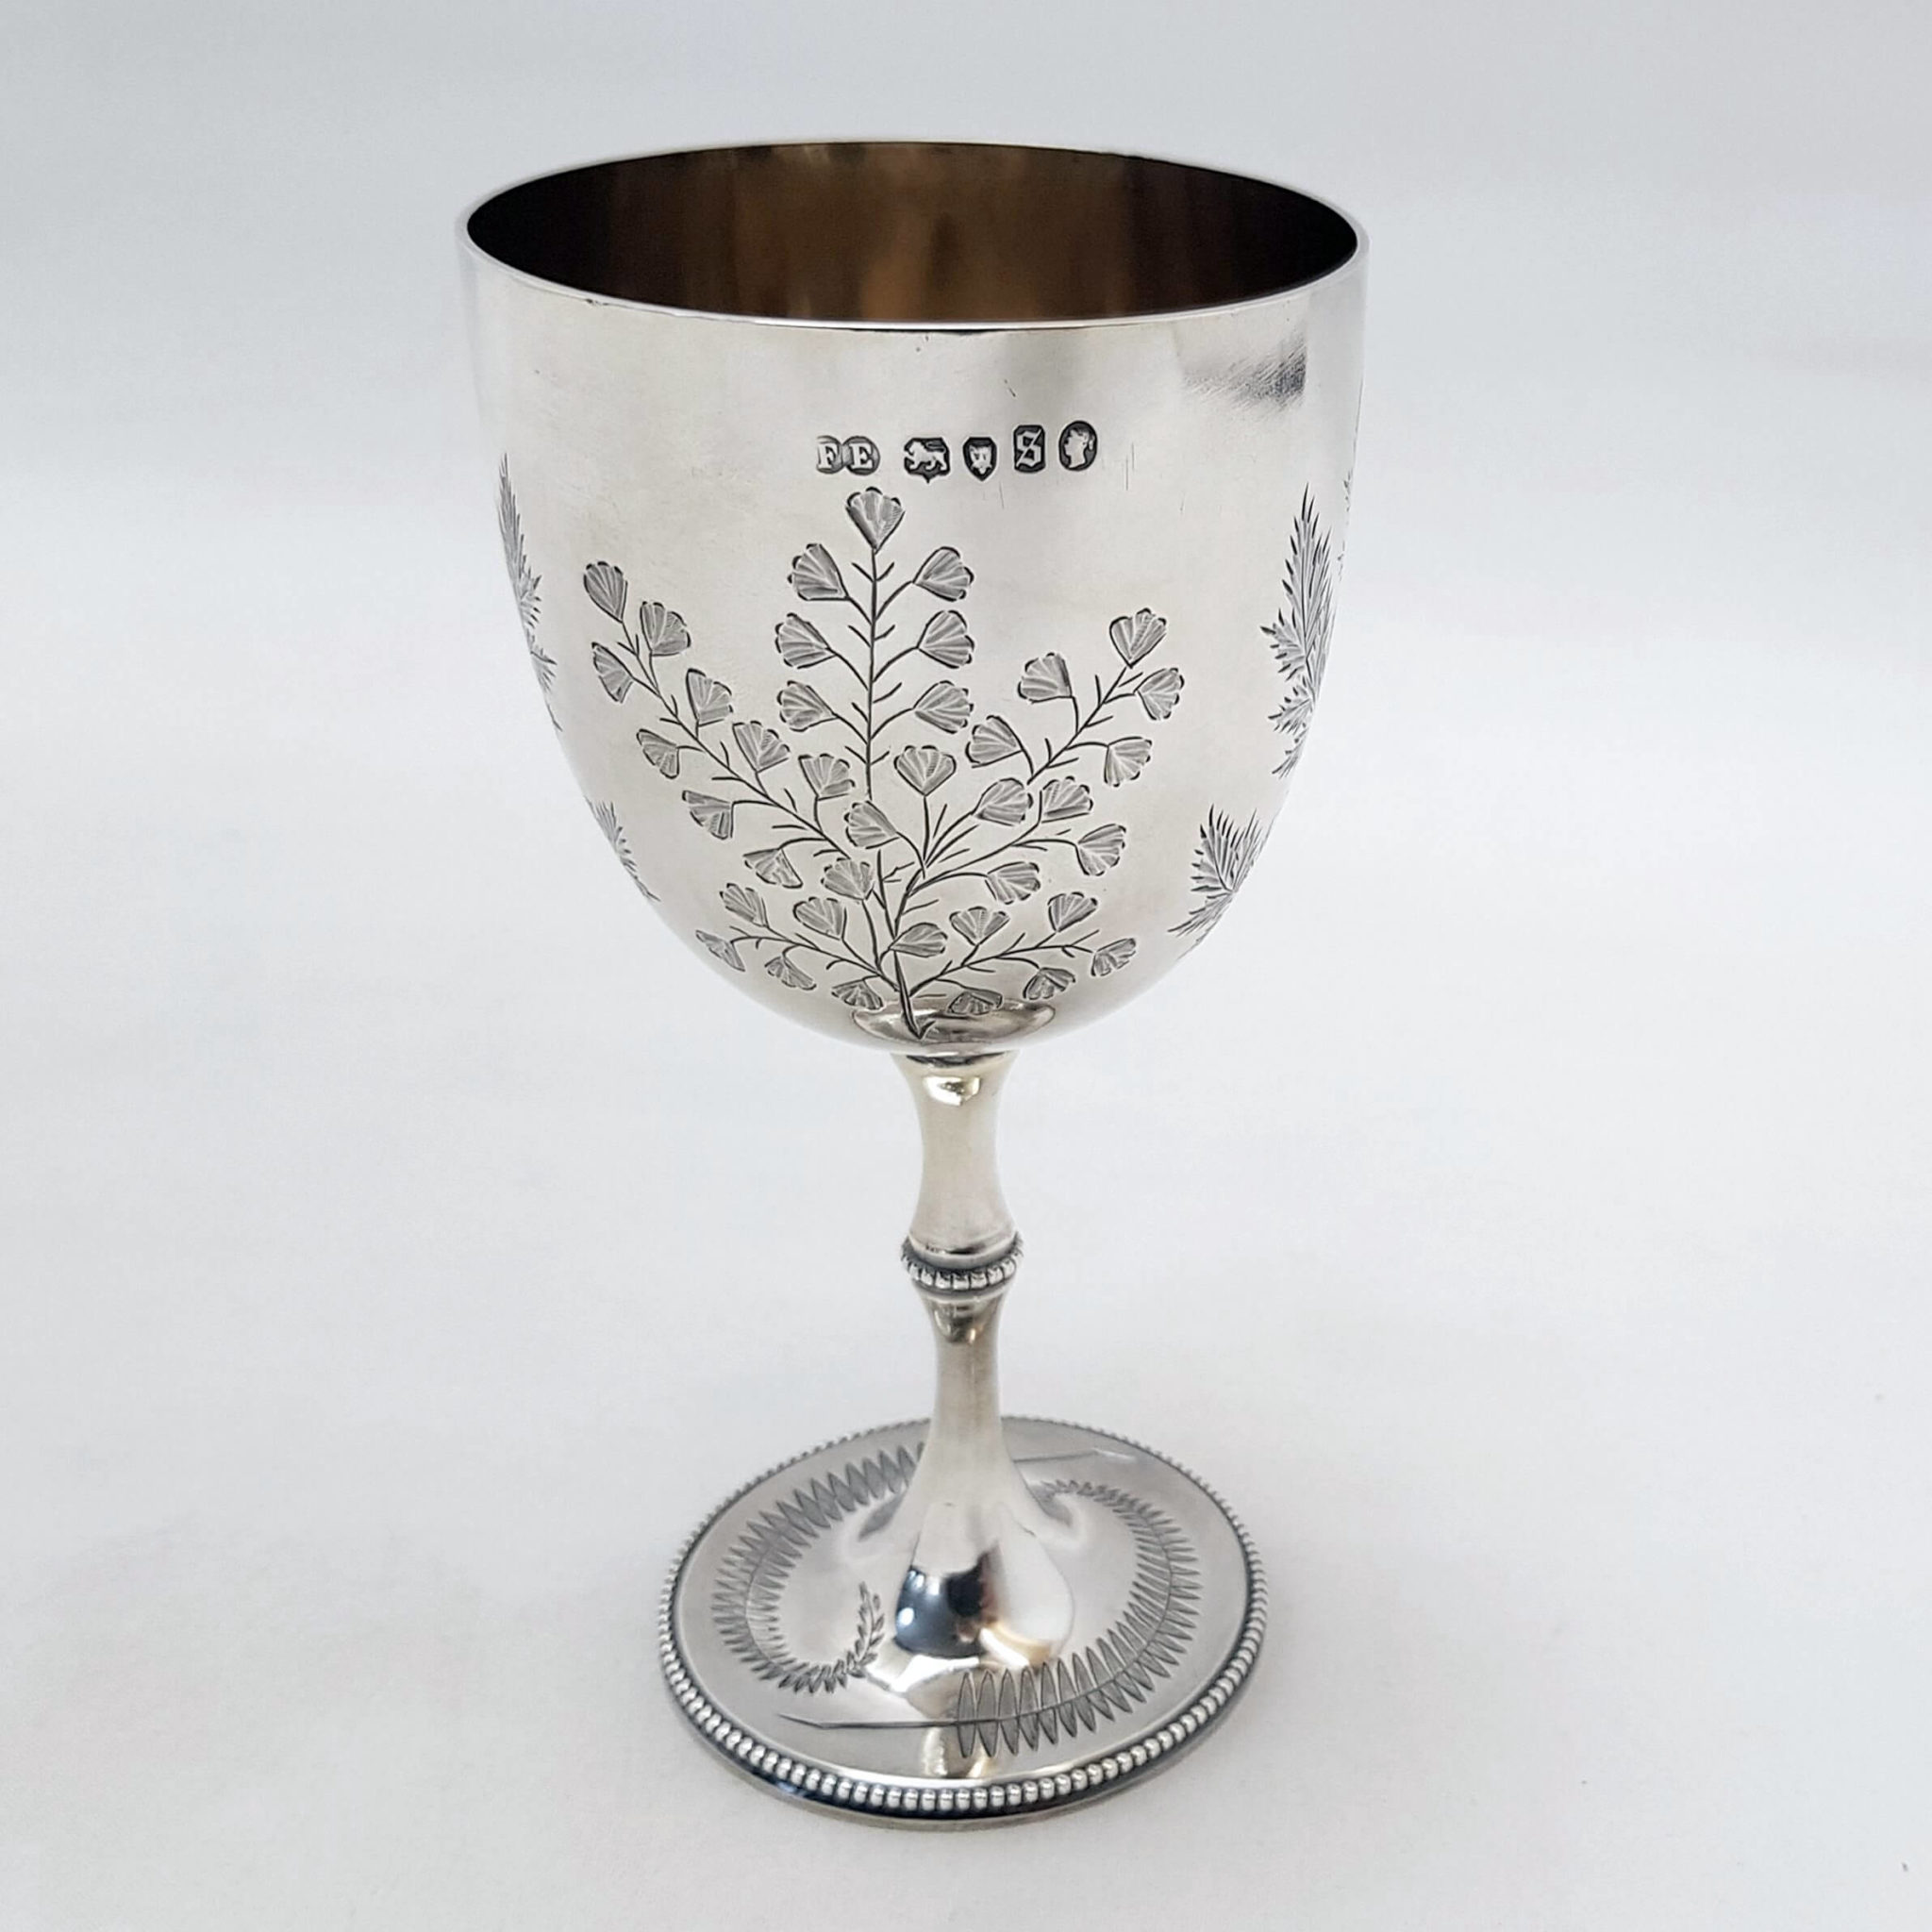 Early English & Continental Silver Antiques | waxantiques